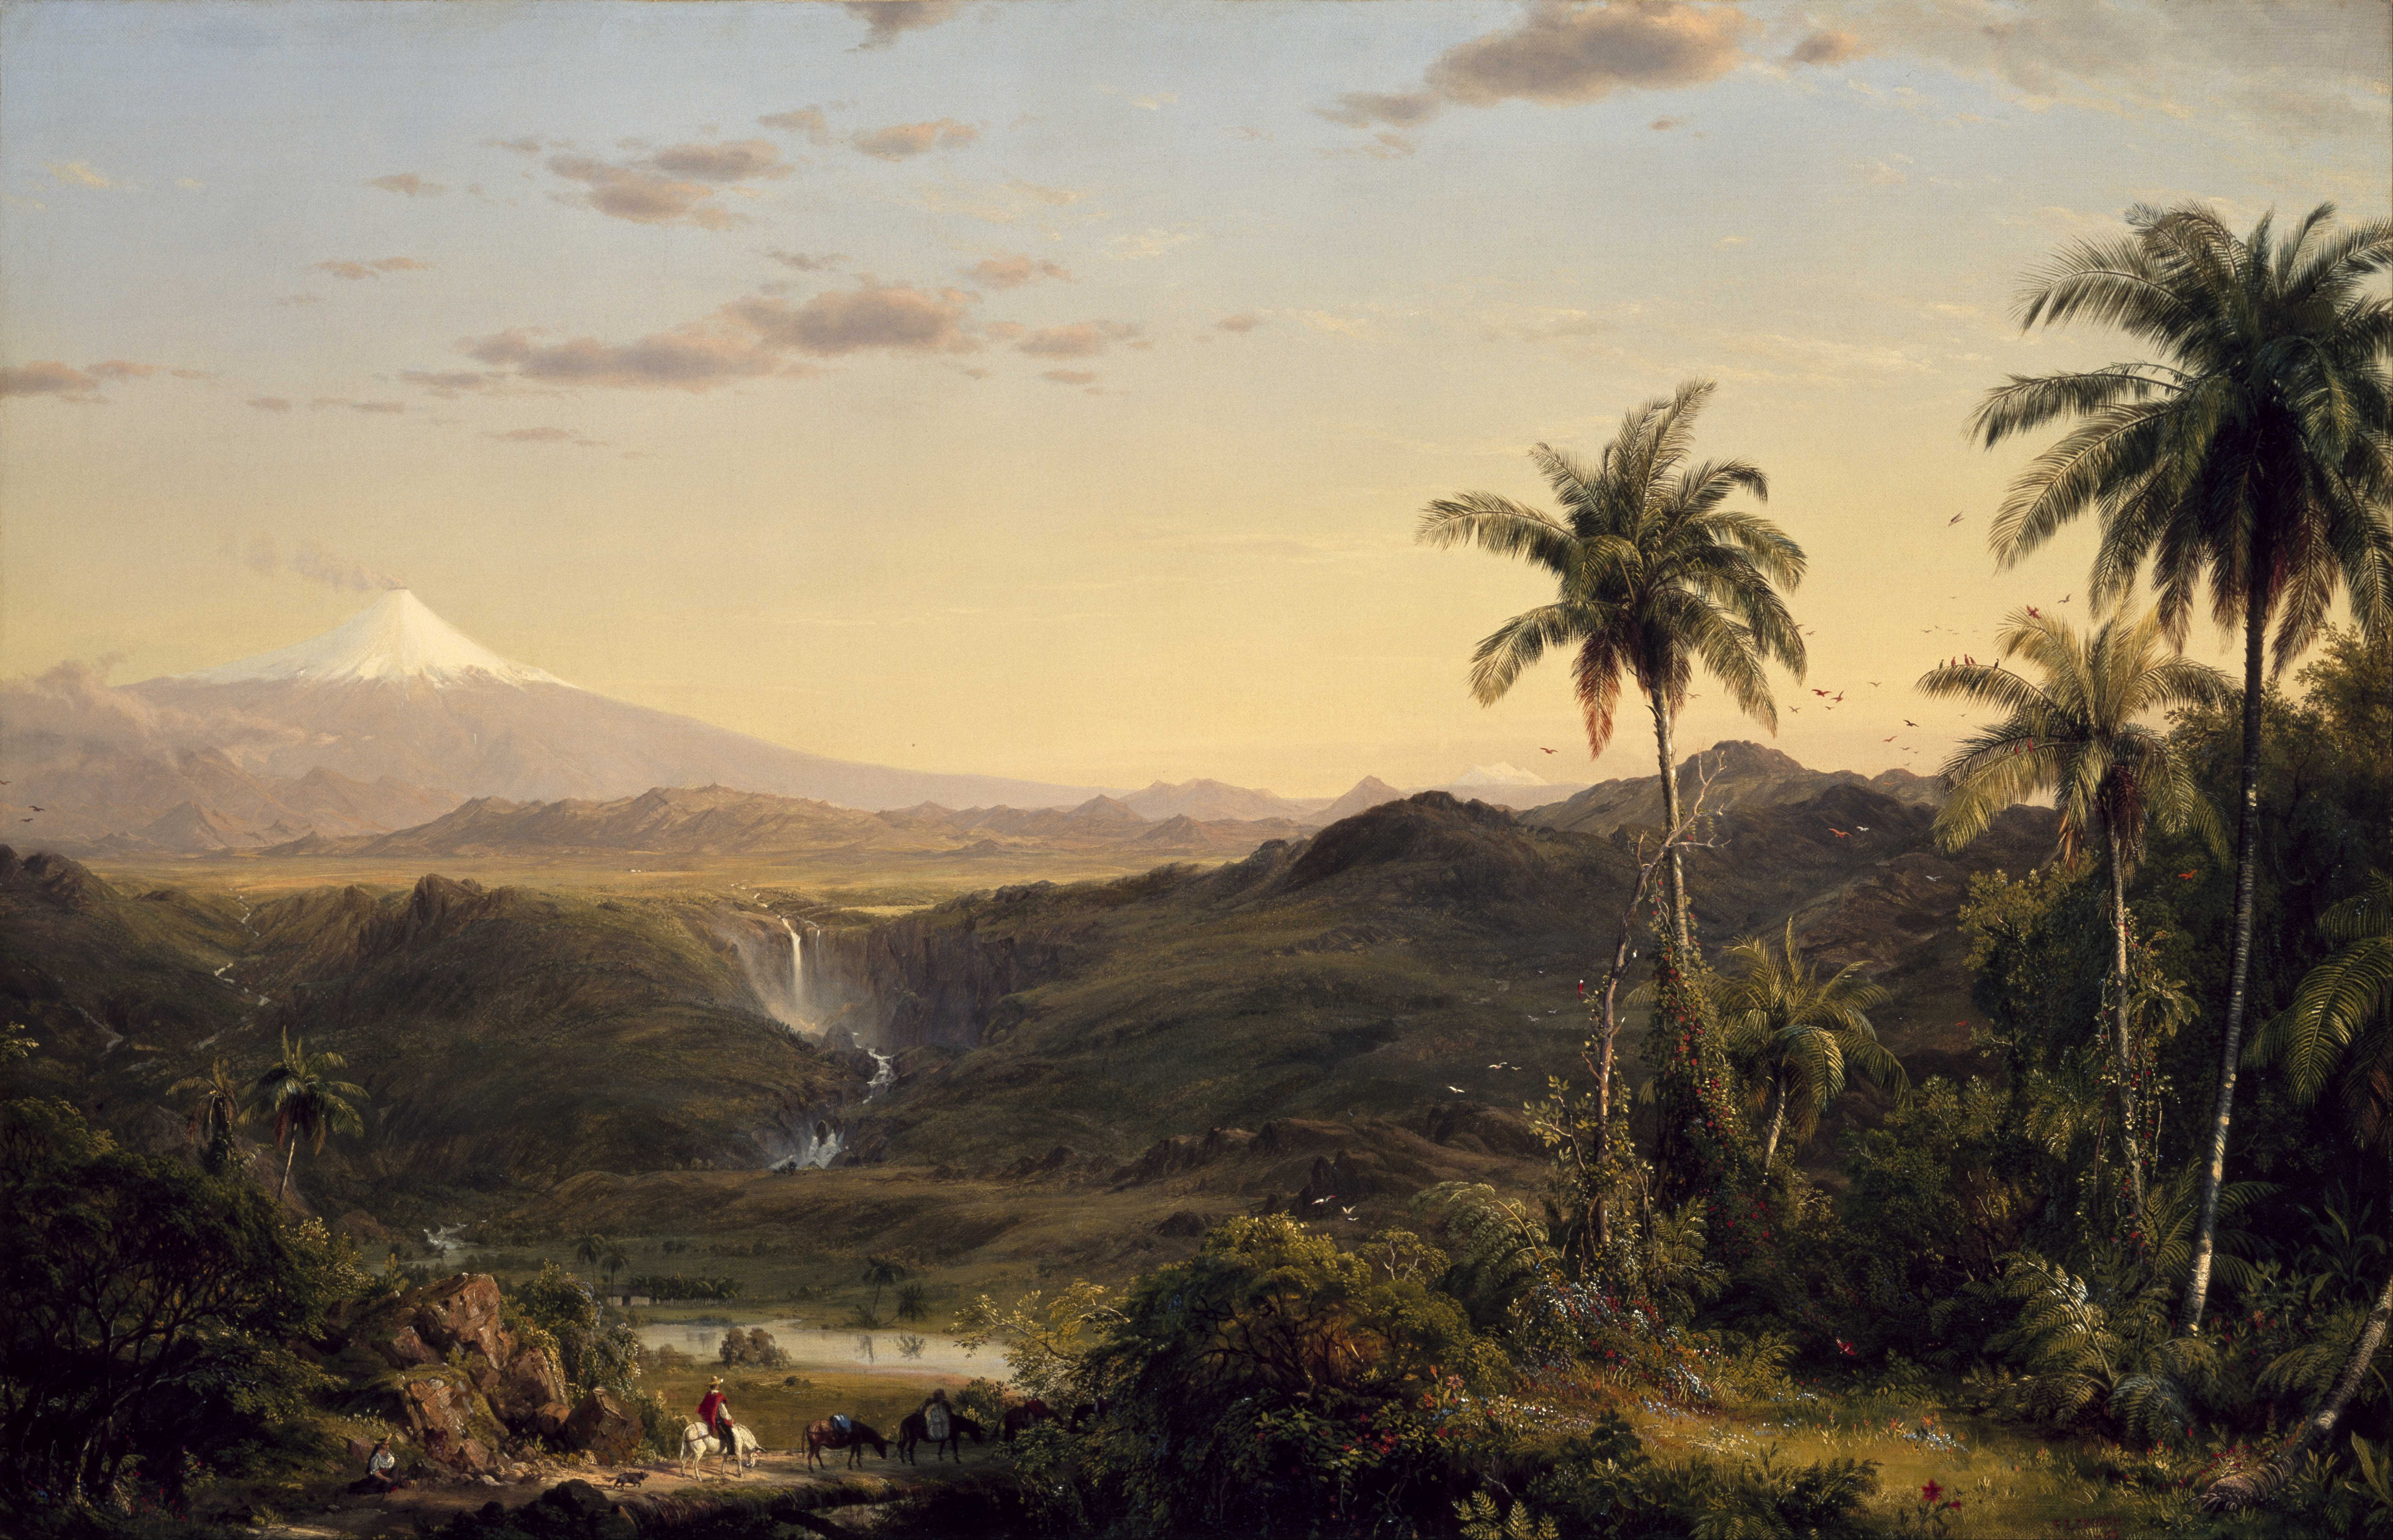 Wallpaper, Frederic Edwin Church, landscape, painting, classic art, waterfall, palm trees, traditional art 8322x5357